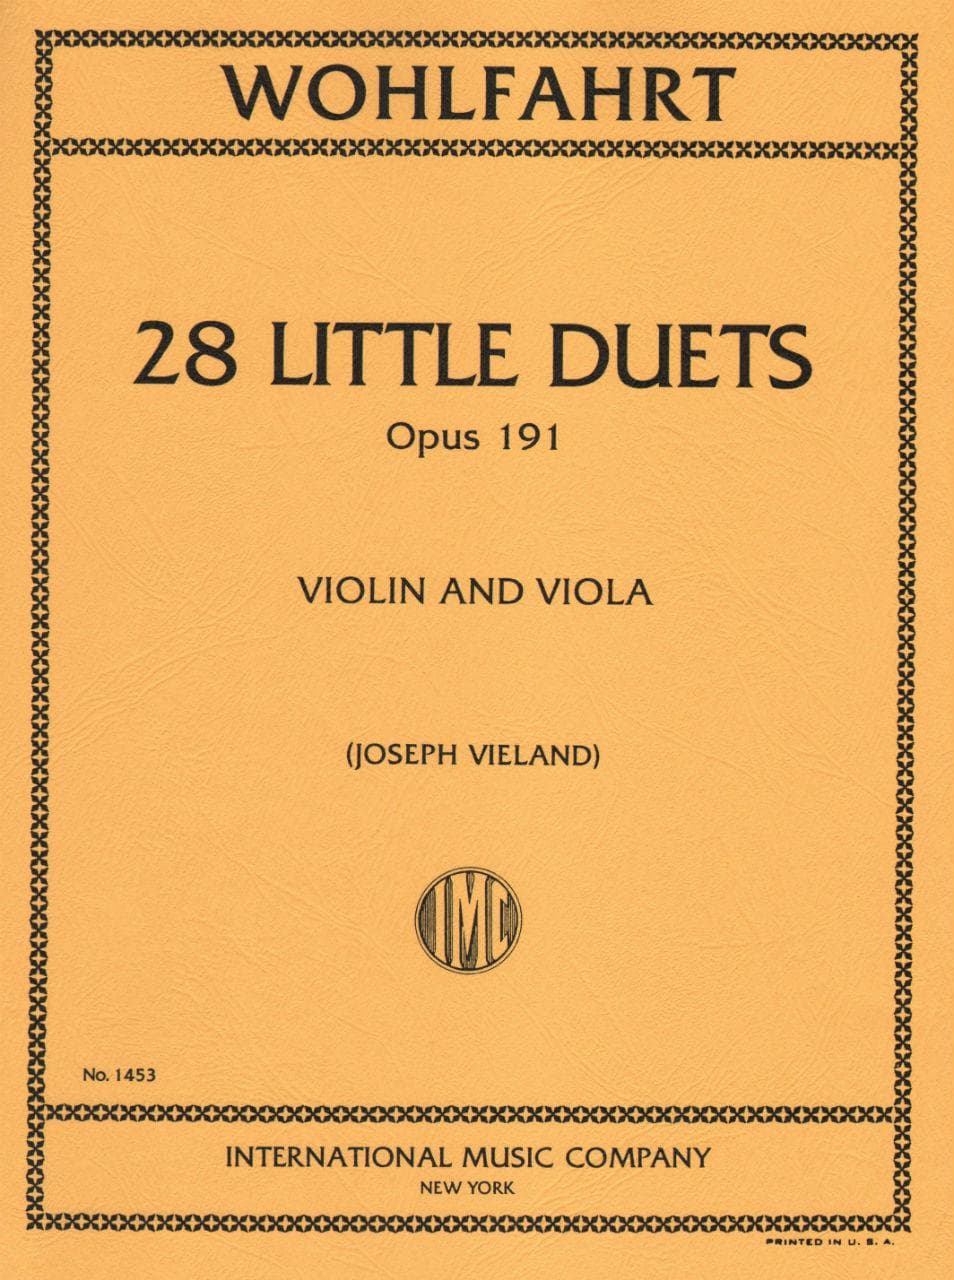 Wohlfahrt, Franz - 28 Little Duets, Op 191 For Violin and Viola Edited by Vieland Published by International Music Company